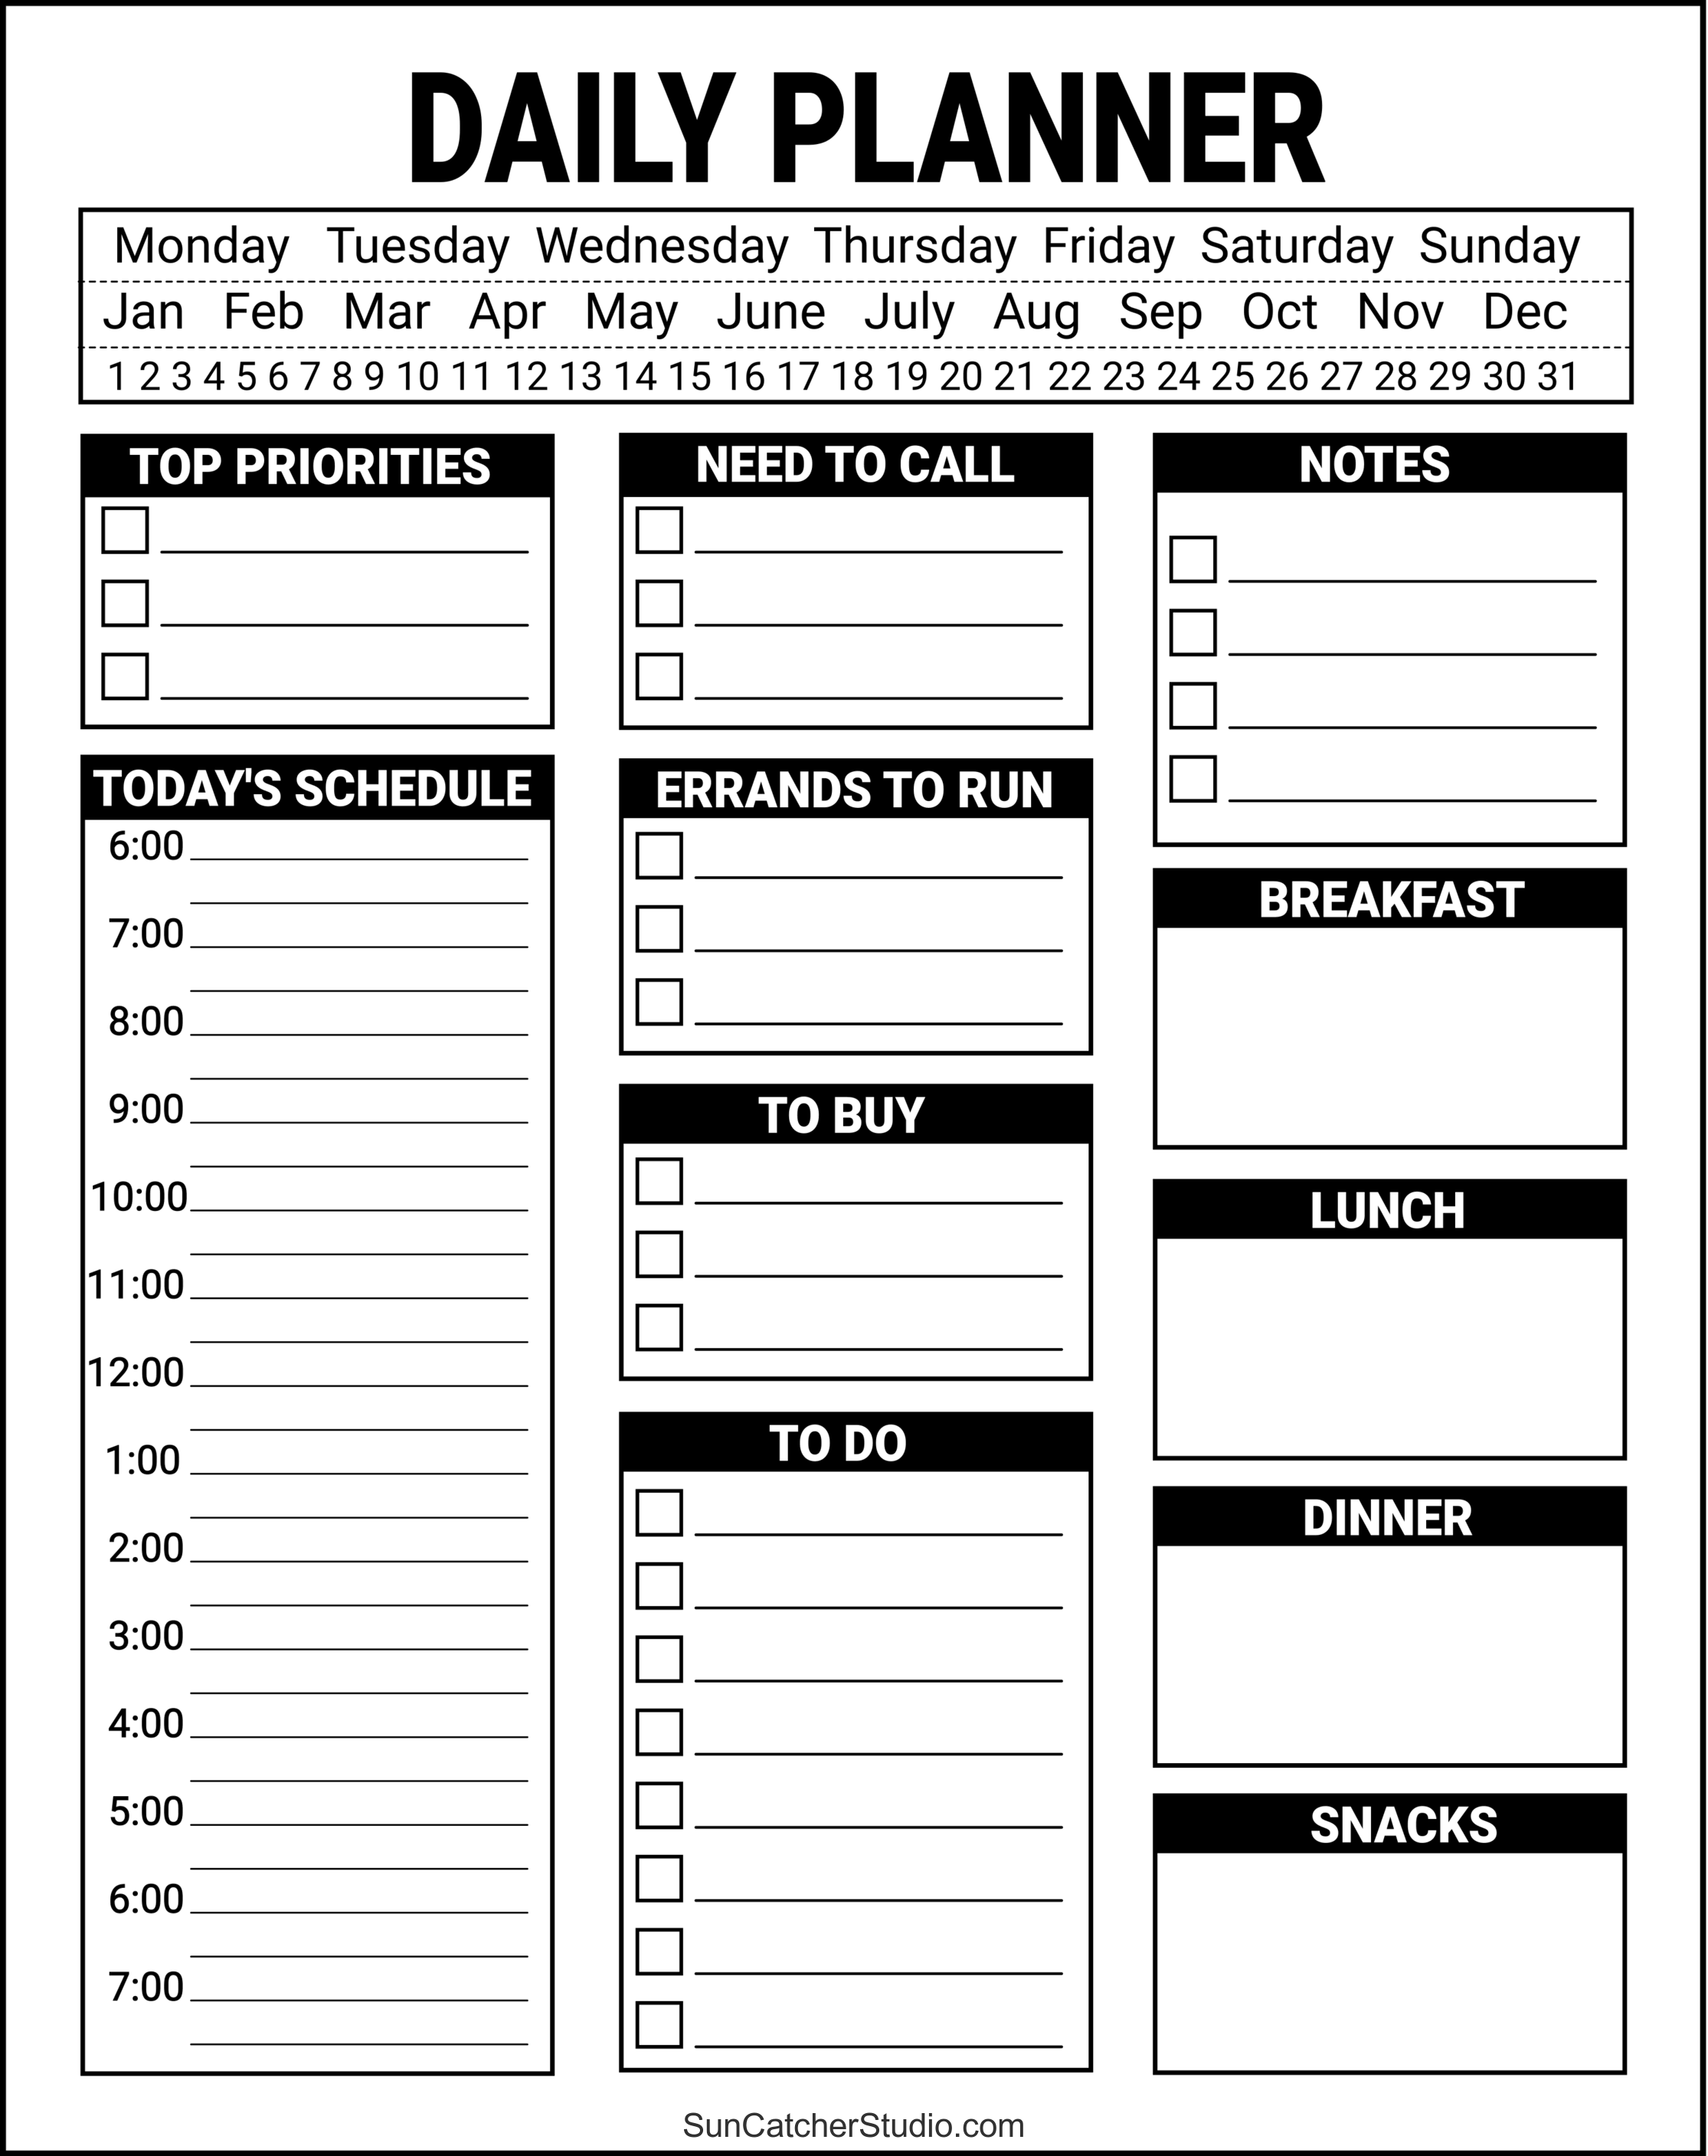 Free Printable Daily Planner Templates PDF Format DIY Projects Patterns Monograms Designs 